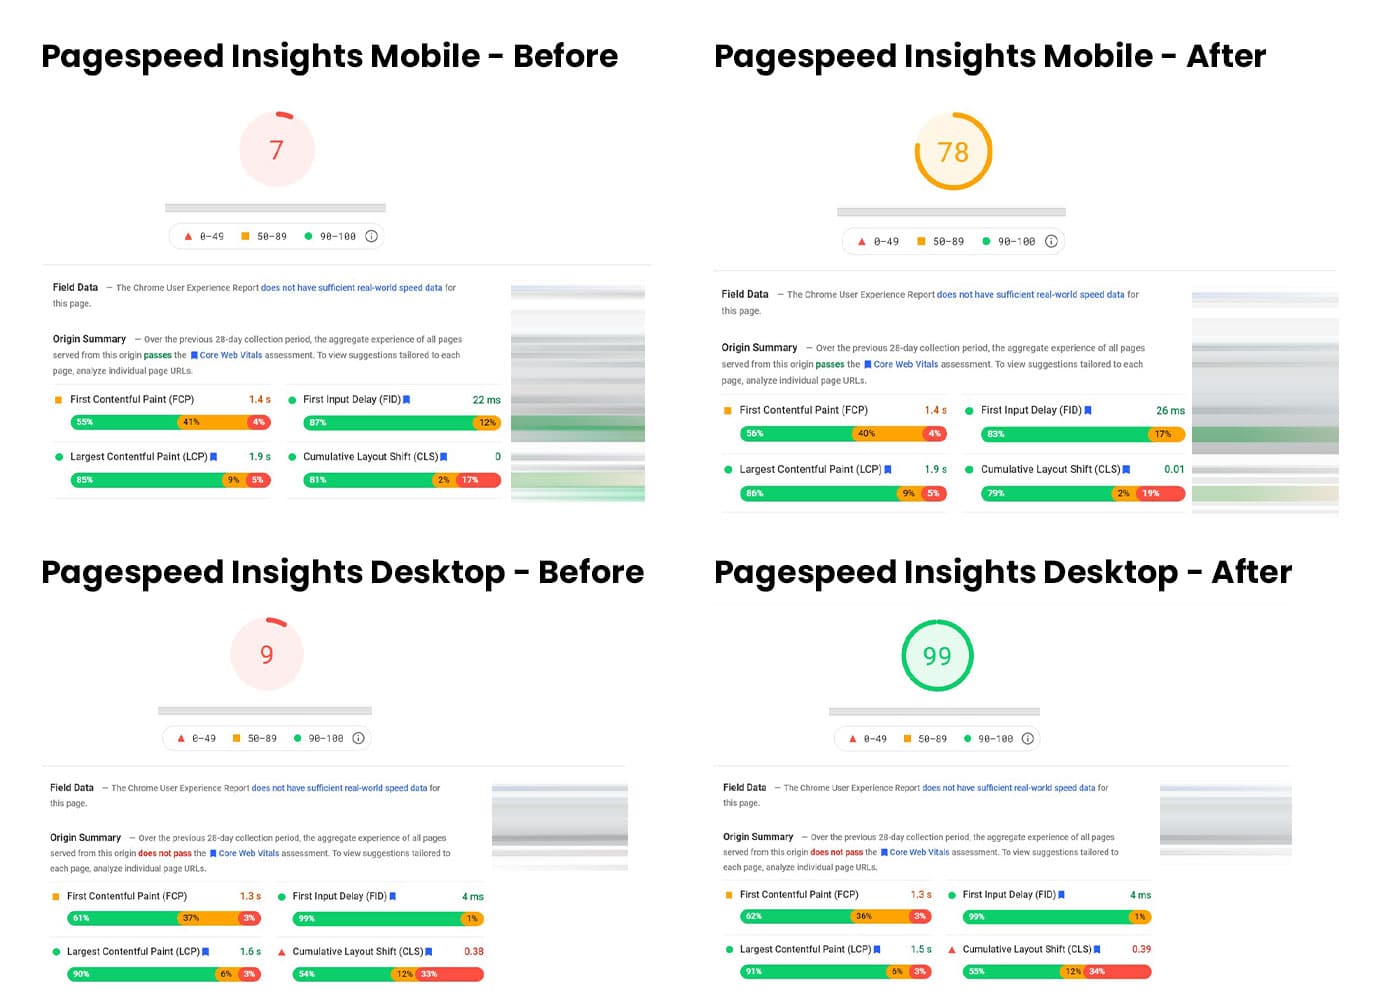 Pagespeed insights results showing mobile score at 7 before and 78 after site speed optimization. Desktop was at 9 before and now sitting at 99.